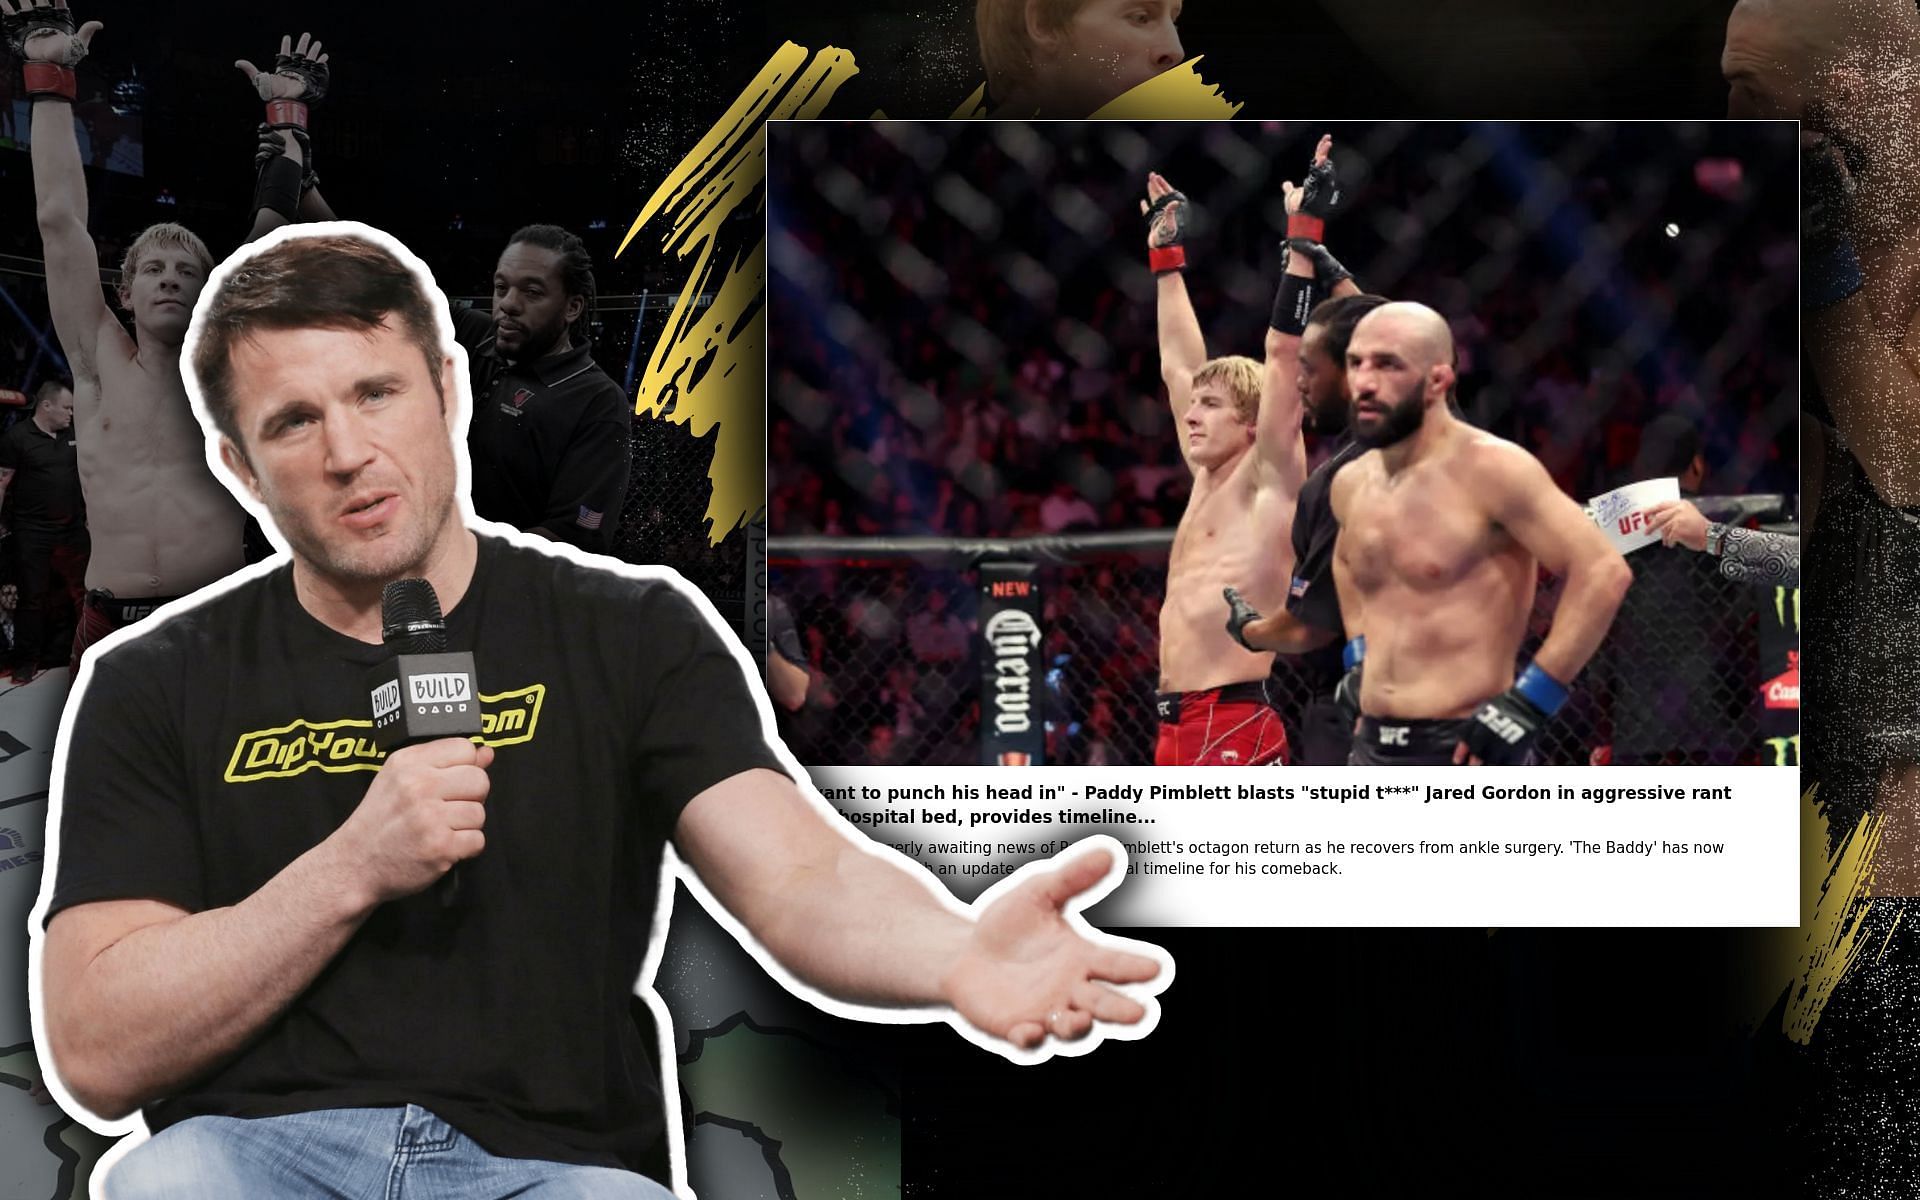 Chael Sonnen explains why Paddy Pimblett lashed out at Jared Gordon. [Image credits: Getty Images]